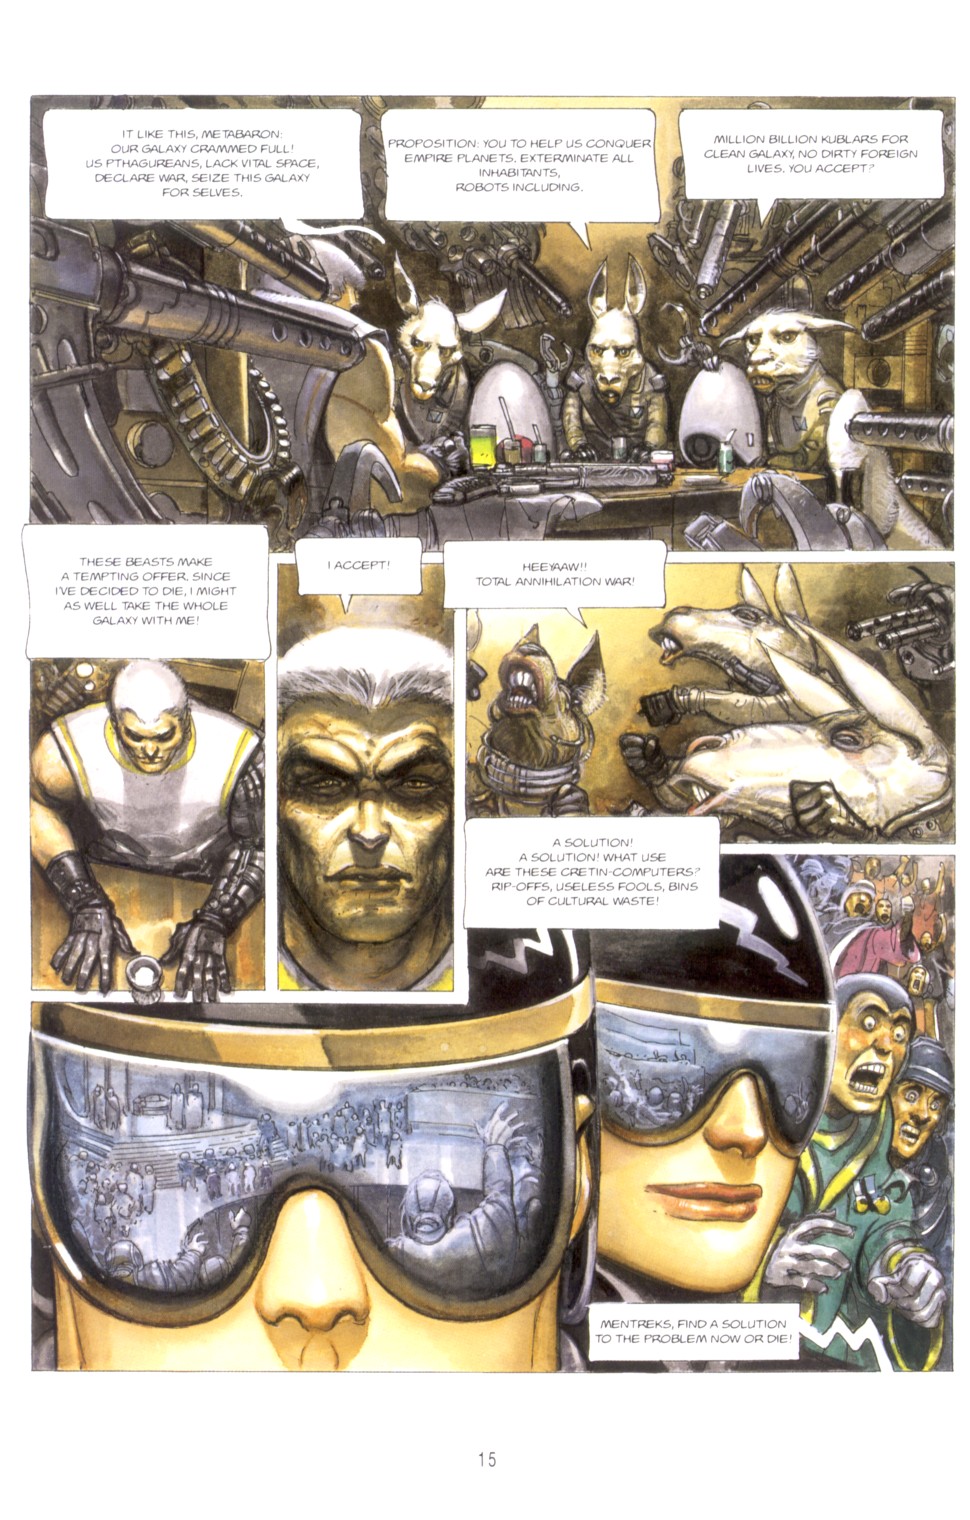 Read online The Metabarons comic -  Issue #9 - The Mentrek's Solution - 14